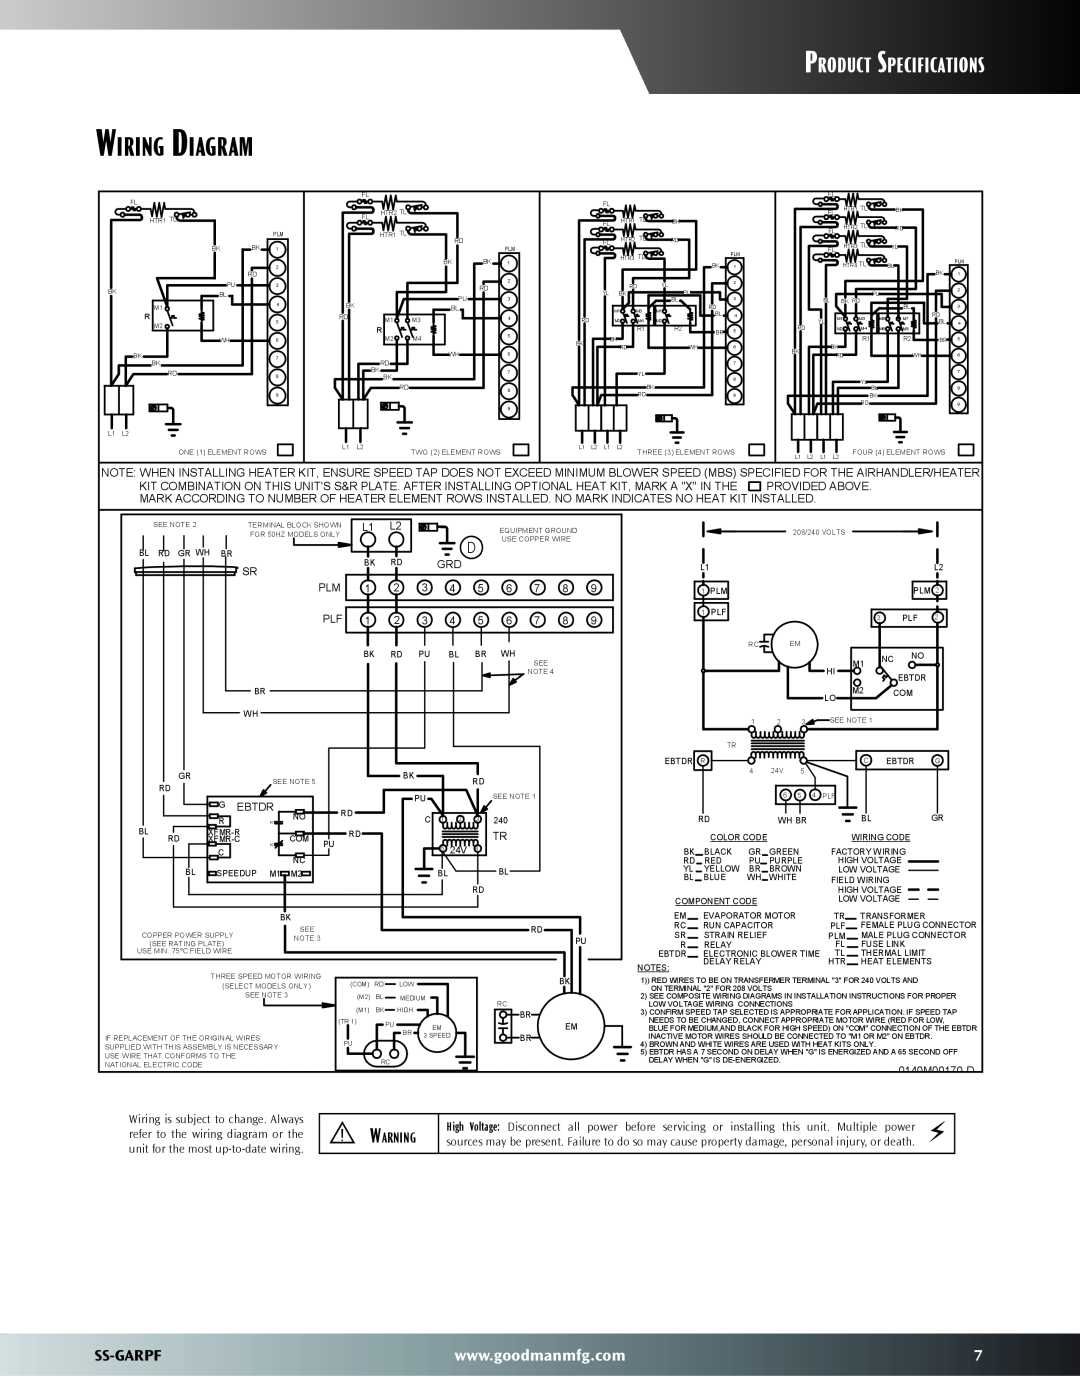 Goodman Mfg Air Handler with Painted Cabinet, SS-GARPF dimensions Wiring Diagram, Product Specifications, Ss-Garpf 